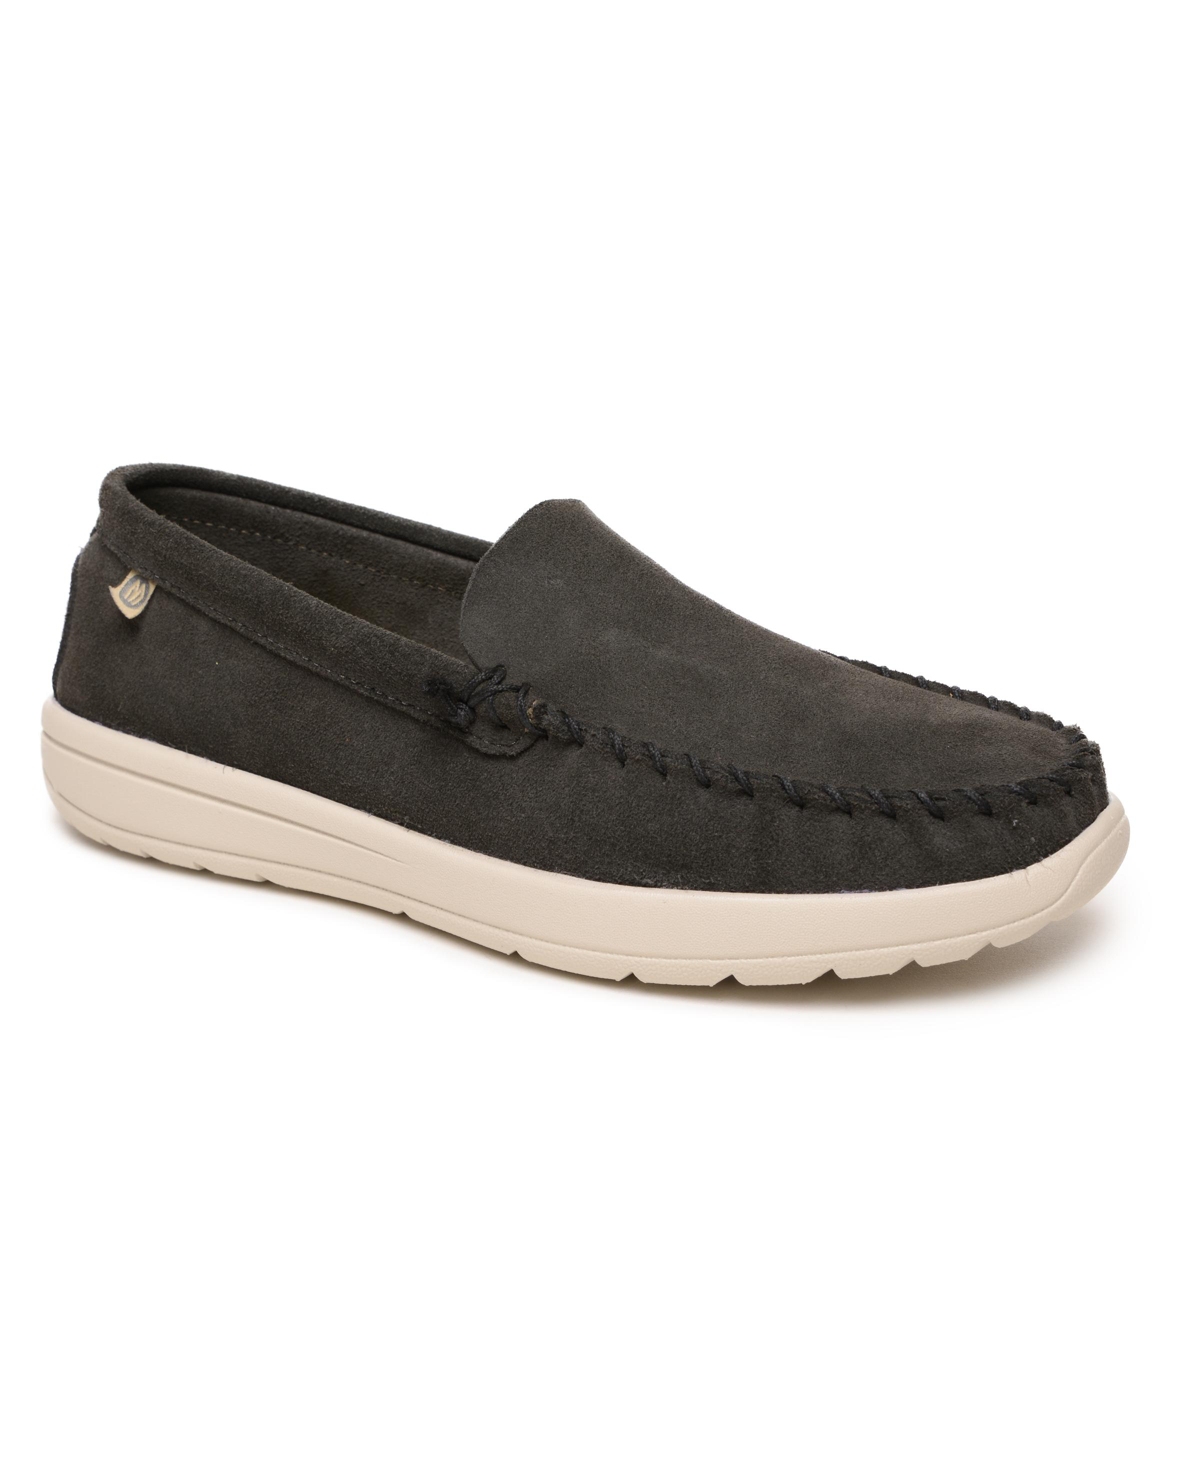 Men's Discover Classic Suede Slip-on Shoes - Charcoal